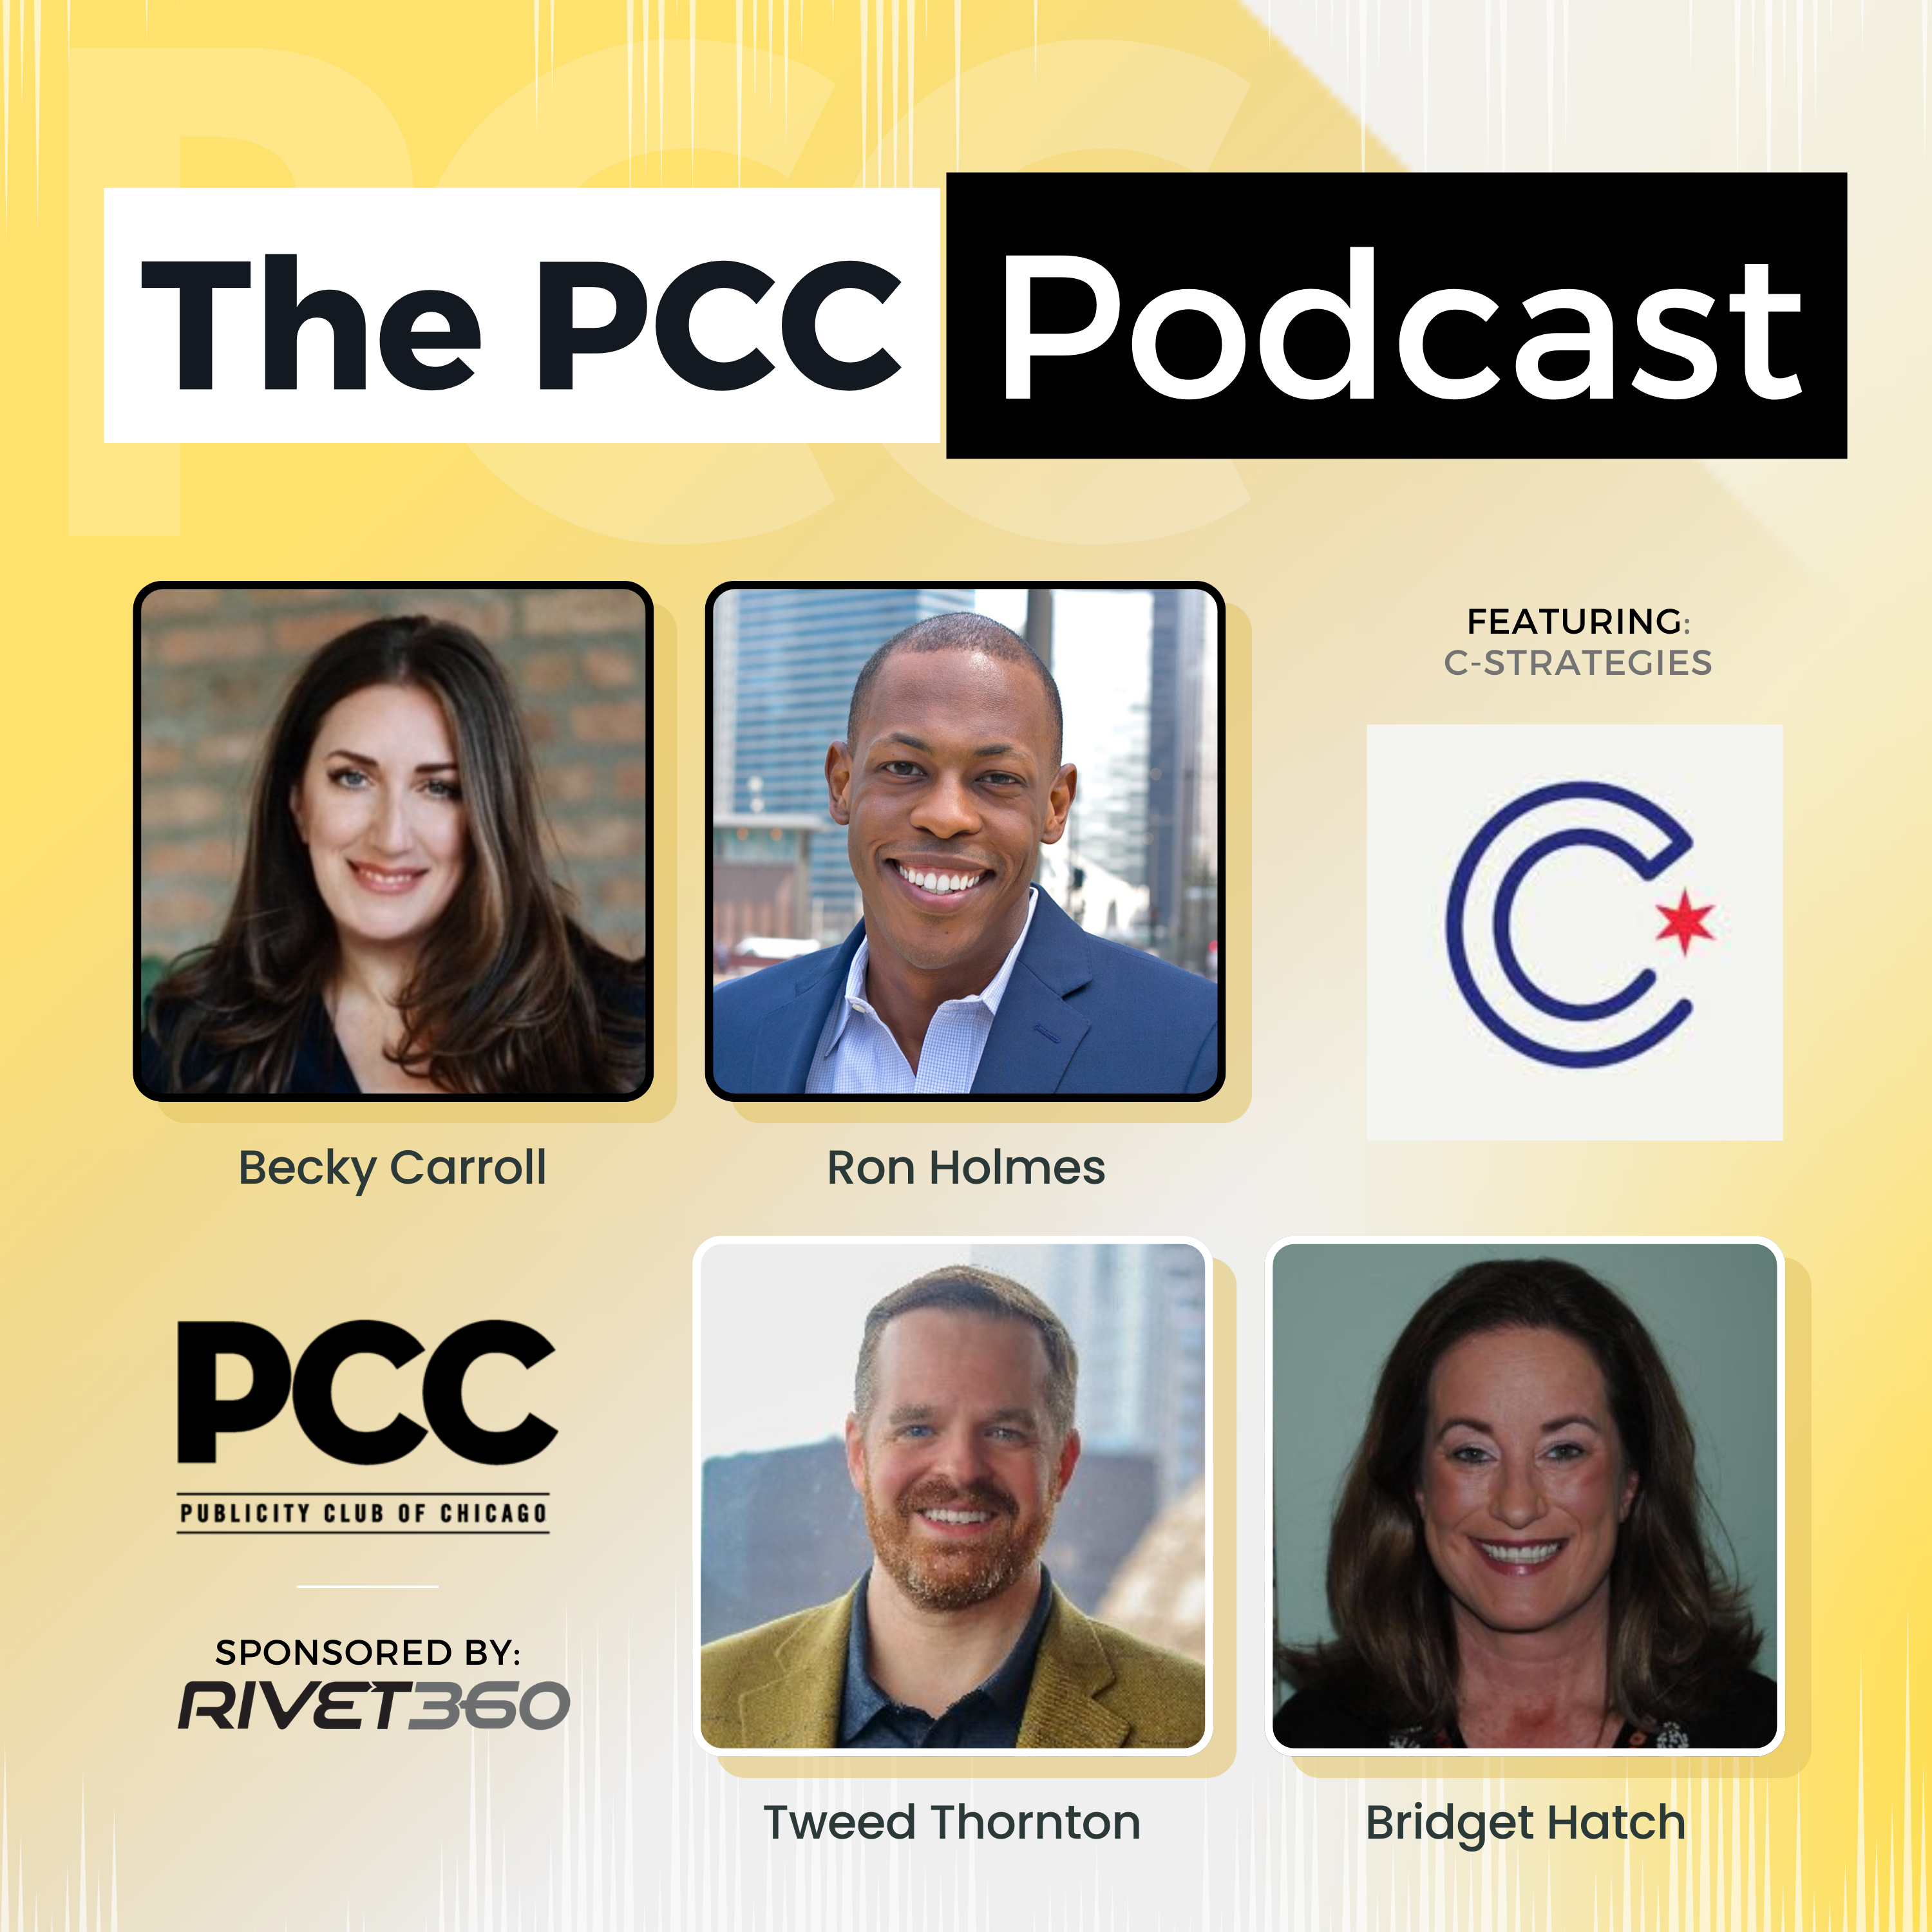 PCC Podcast: The C-Strategies Episode